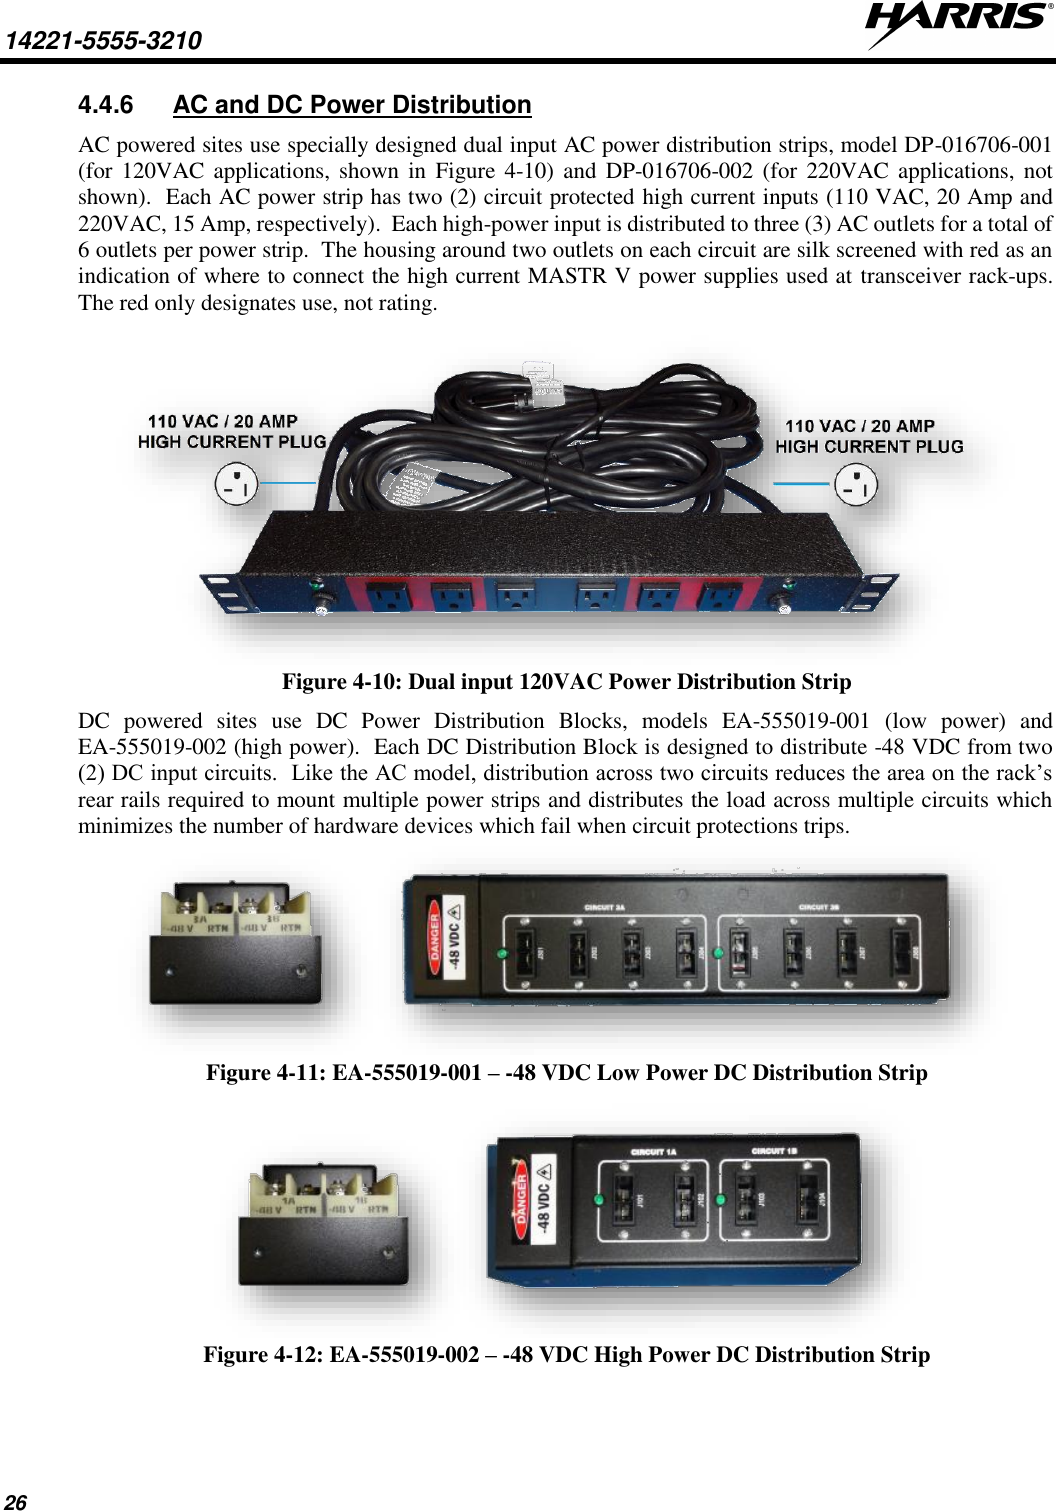 14221-5555-3210   26 4.4.6  AC and DC Power Distribution AC powered sites use specially designed dual input AC power distribution strips, model DP-016706-001 (for 120VAC applications, shown  in  Figure  4-10)  and  DP-016706-002 (for 220VAC applications, not shown).  Each AC power strip has two (2) circuit protected high current inputs (110 VAC, 20 Amp and 220VAC, 15 Amp, respectively).  Each high-power input is distributed to three (3) AC outlets for a total of 6 outlets per power strip.  The housing around two outlets on each circuit are silk screened with red as an indication of where to connect the high current MASTR V power supplies used at transceiver rack-ups.  The red only designates use, not rating.   Figure 4-10: Dual input 120VAC Power Distribution Strip DC  powered  sites  use  DC  Power  Distribution  Blocks,  models  EA-555019-001  (low  power)  and EA-555019-002 (high power).  Each DC Distribution Block is designed to distribute -48 VDC from two (2) DC input circuits.  Like the AC model, distribution across two circuits reduces the area on the rack’s rear rails required to mount multiple power strips and distributes the load across multiple circuits which minimizes the number of hardware devices which fail when circuit protections trips.  Figure 4-11: EA-555019-001 – -48 VDC Low Power DC Distribution Strip   Figure 4-12: EA-555019-002 – -48 VDC High Power DC Distribution Strip   